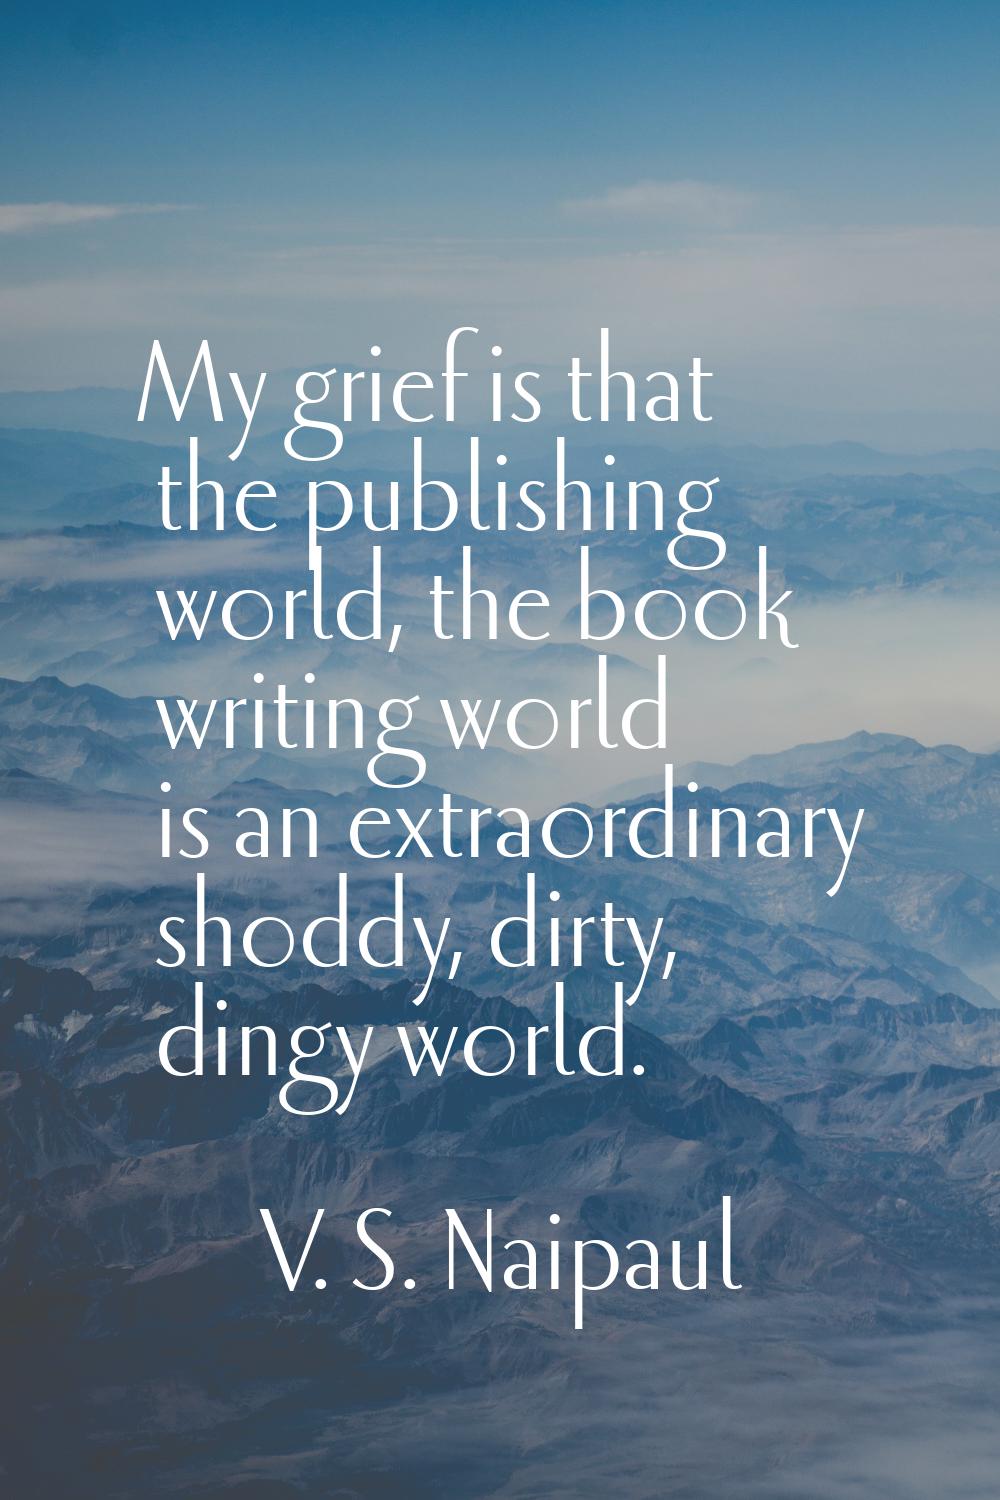 My grief is that the publishing world, the book writing world is an extraordinary shoddy, dirty, di